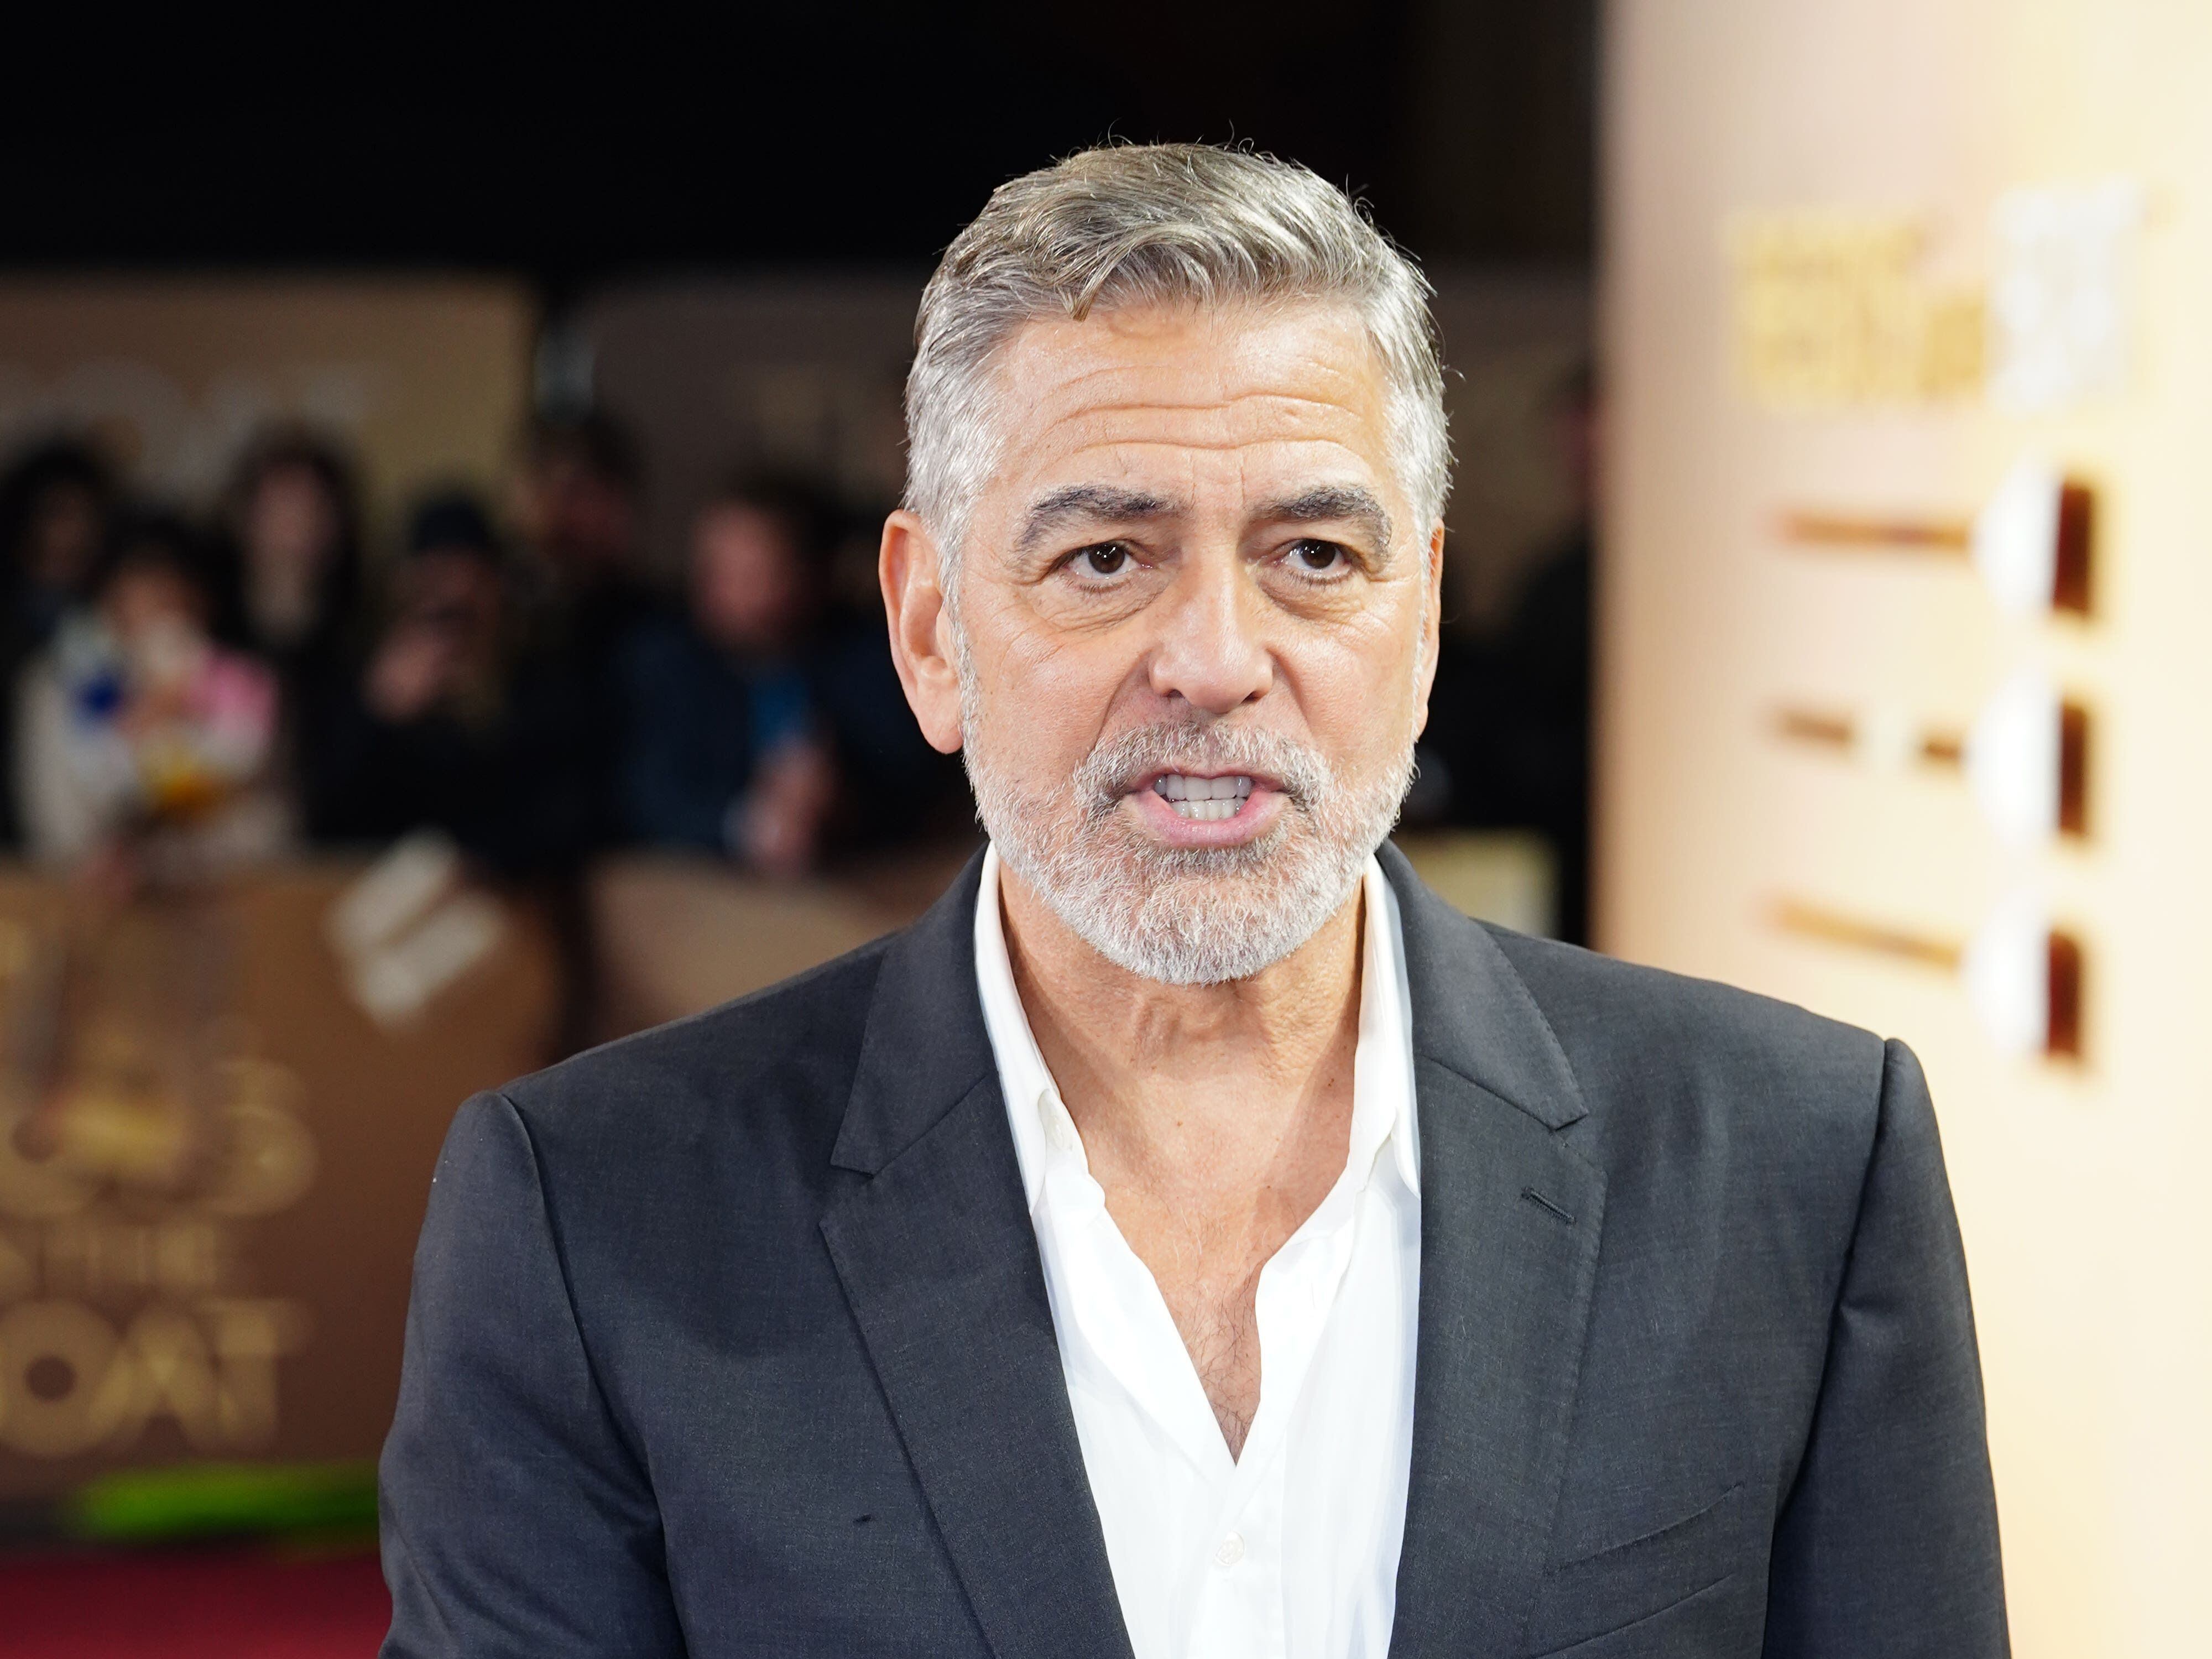 Biden supporter George Clooney asks president to leave race